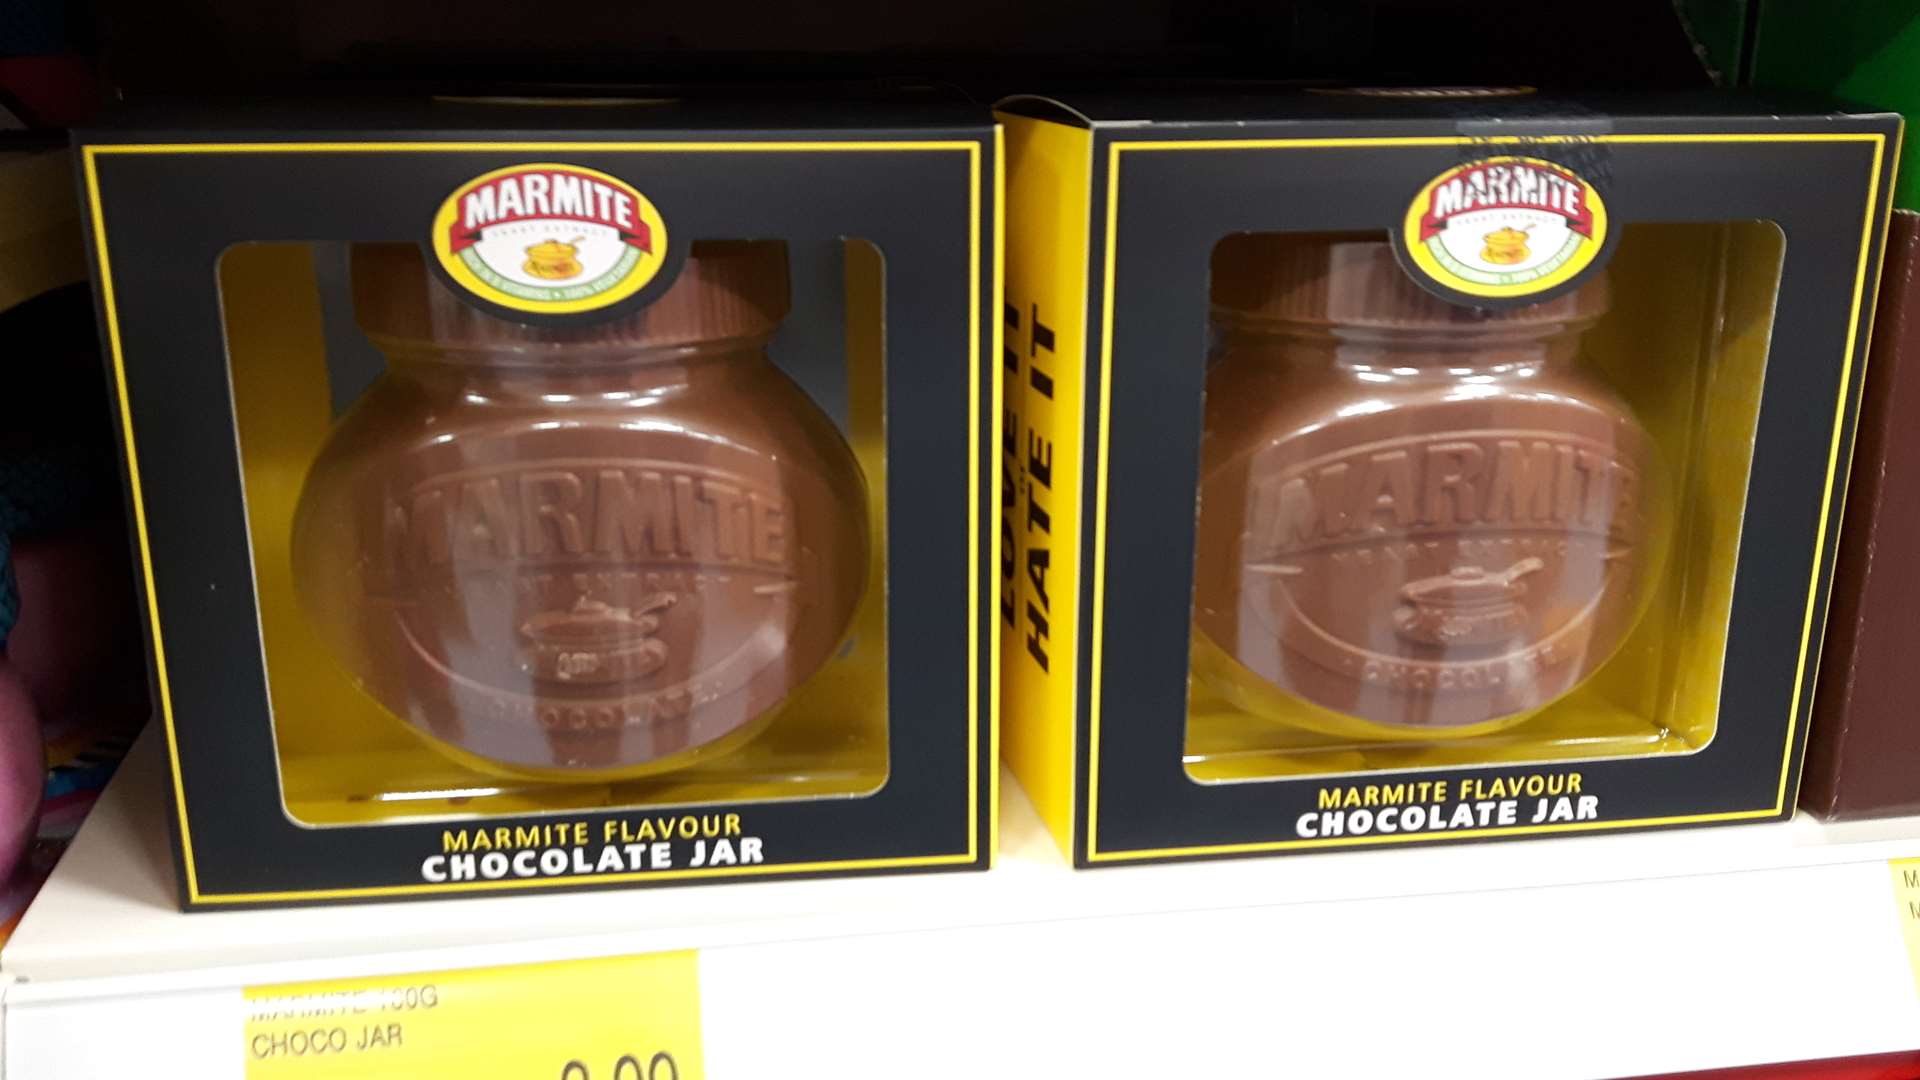 Tesco might be running out of Marmite, but B&M has Marmite flavour chocolate.